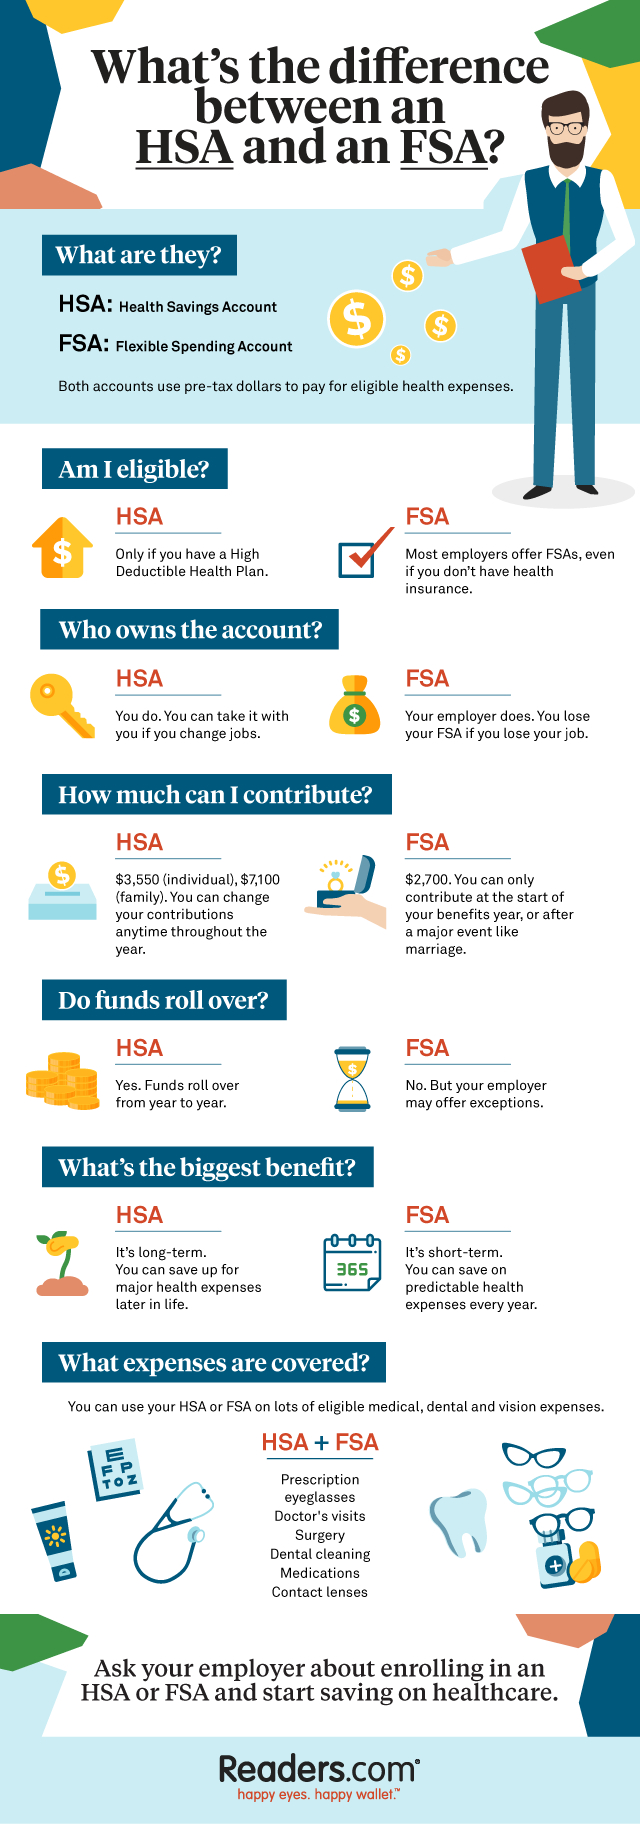 What's the Difference Between FSA and HSA accounts?